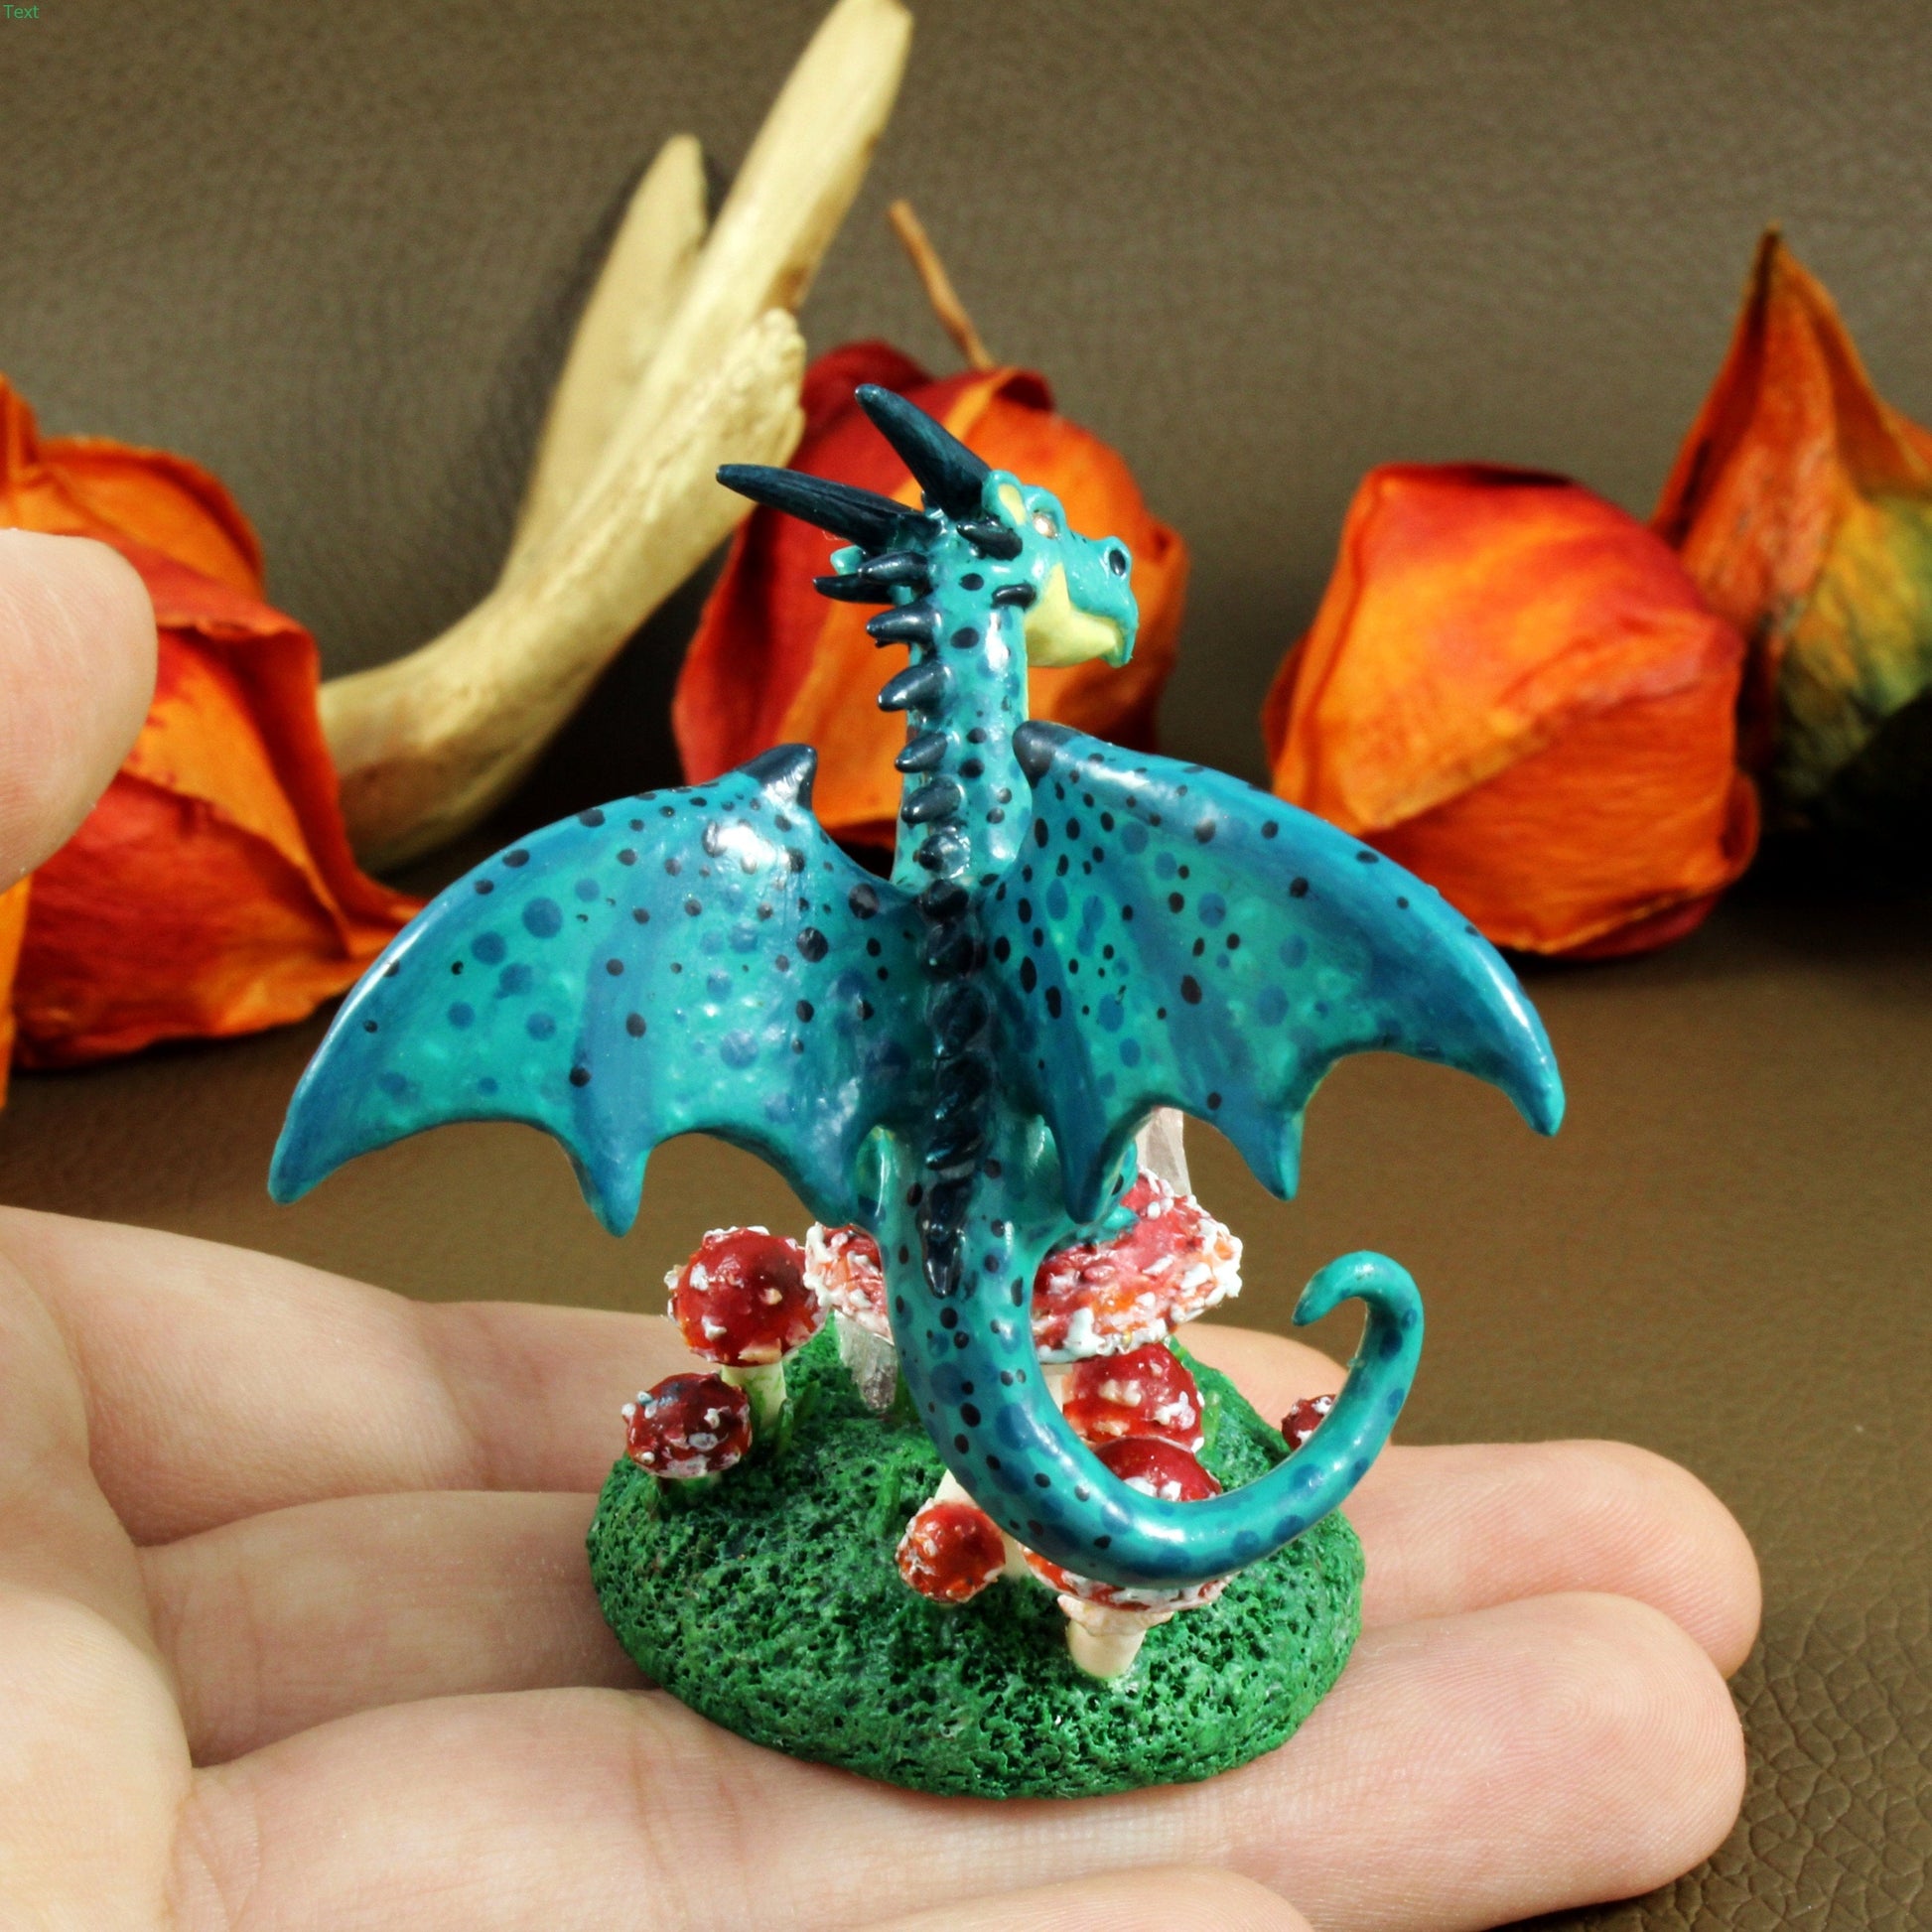 Crystal Dragon with Mushroom Sculpture in Polymer Clay - The Folky Fox